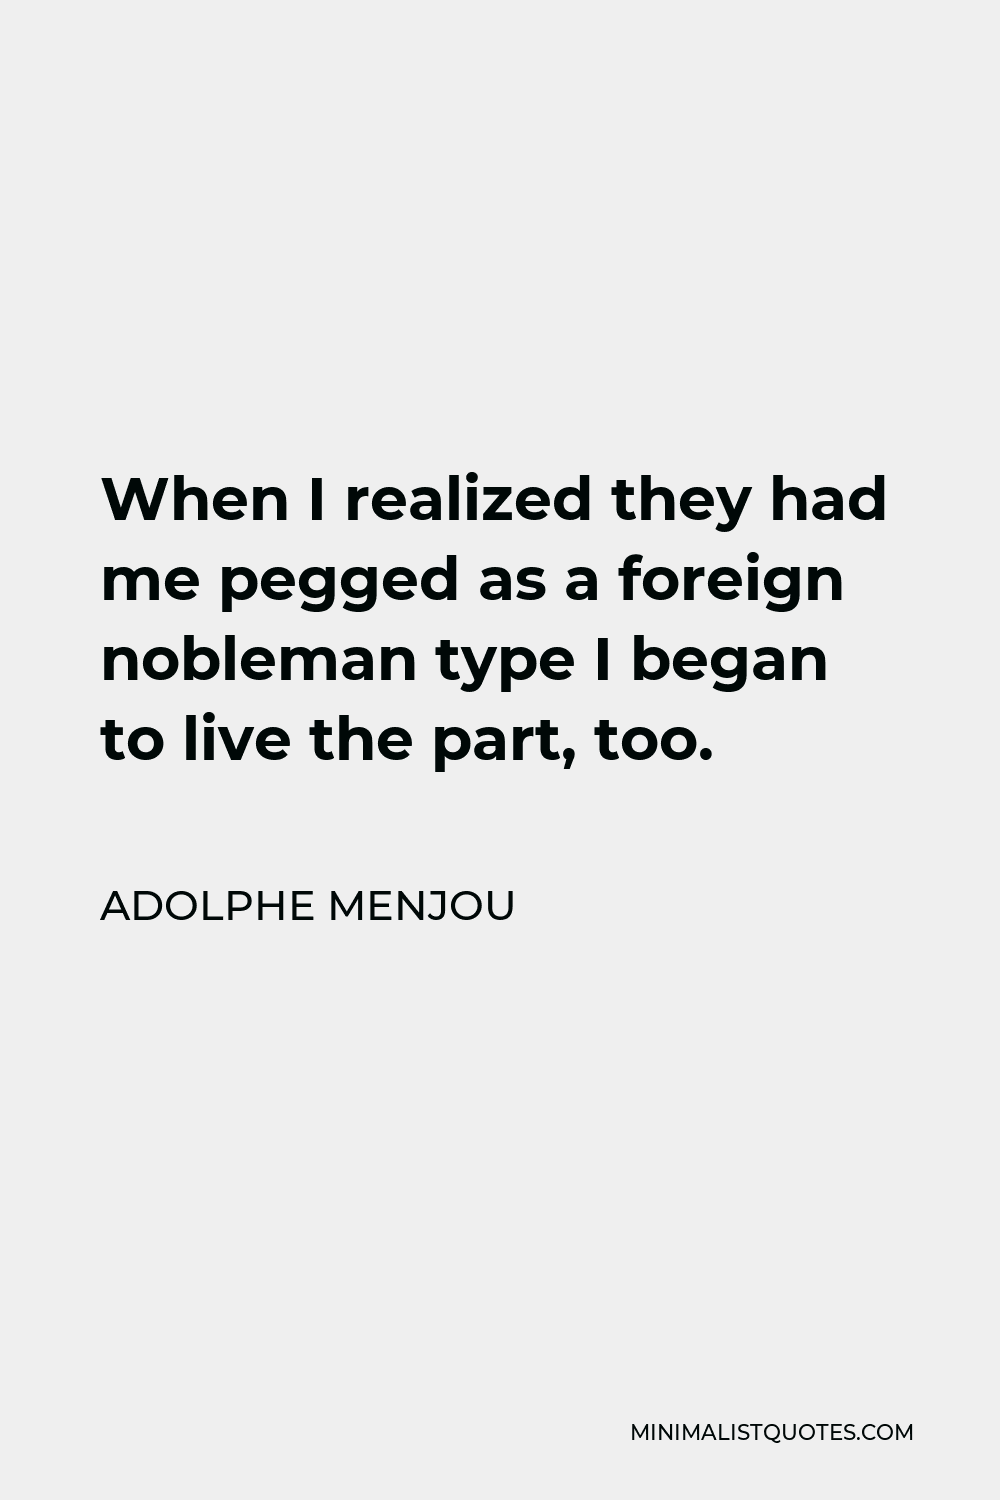 Adolphe Menjou Quote - When I realized they had me pegged as a foreign nobleman type I began to live the part, too.